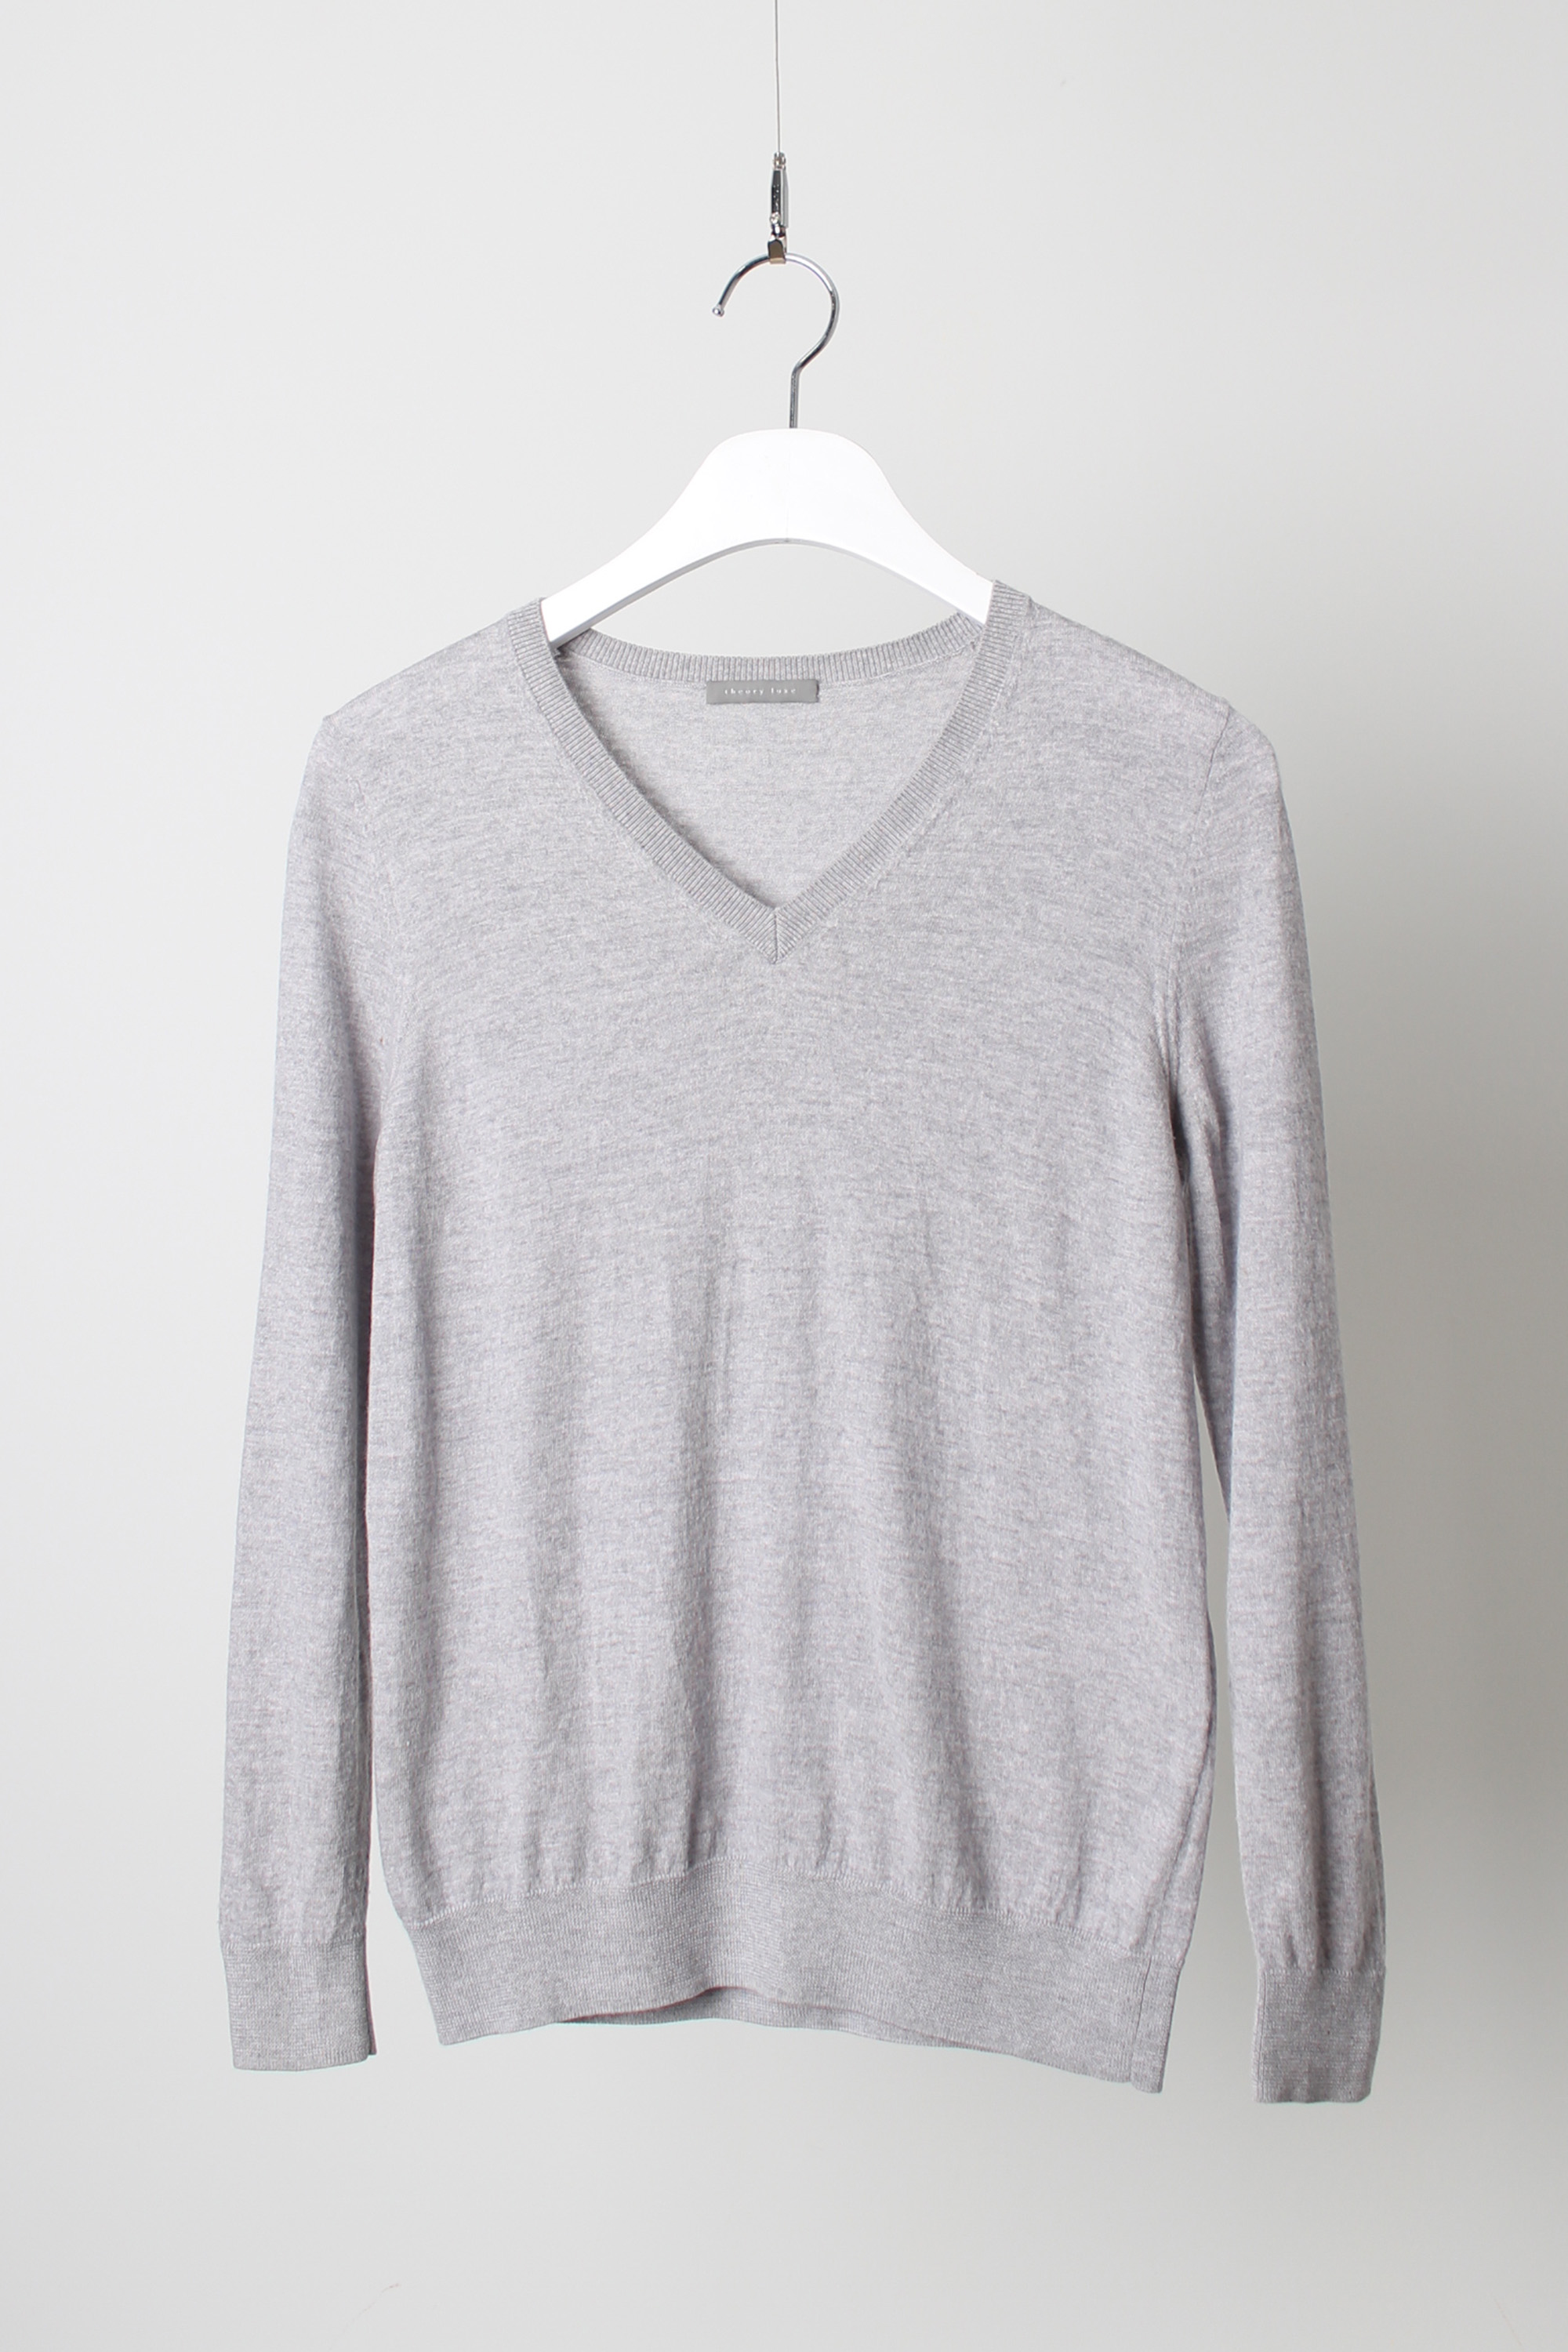 Theory luxe v neck knit